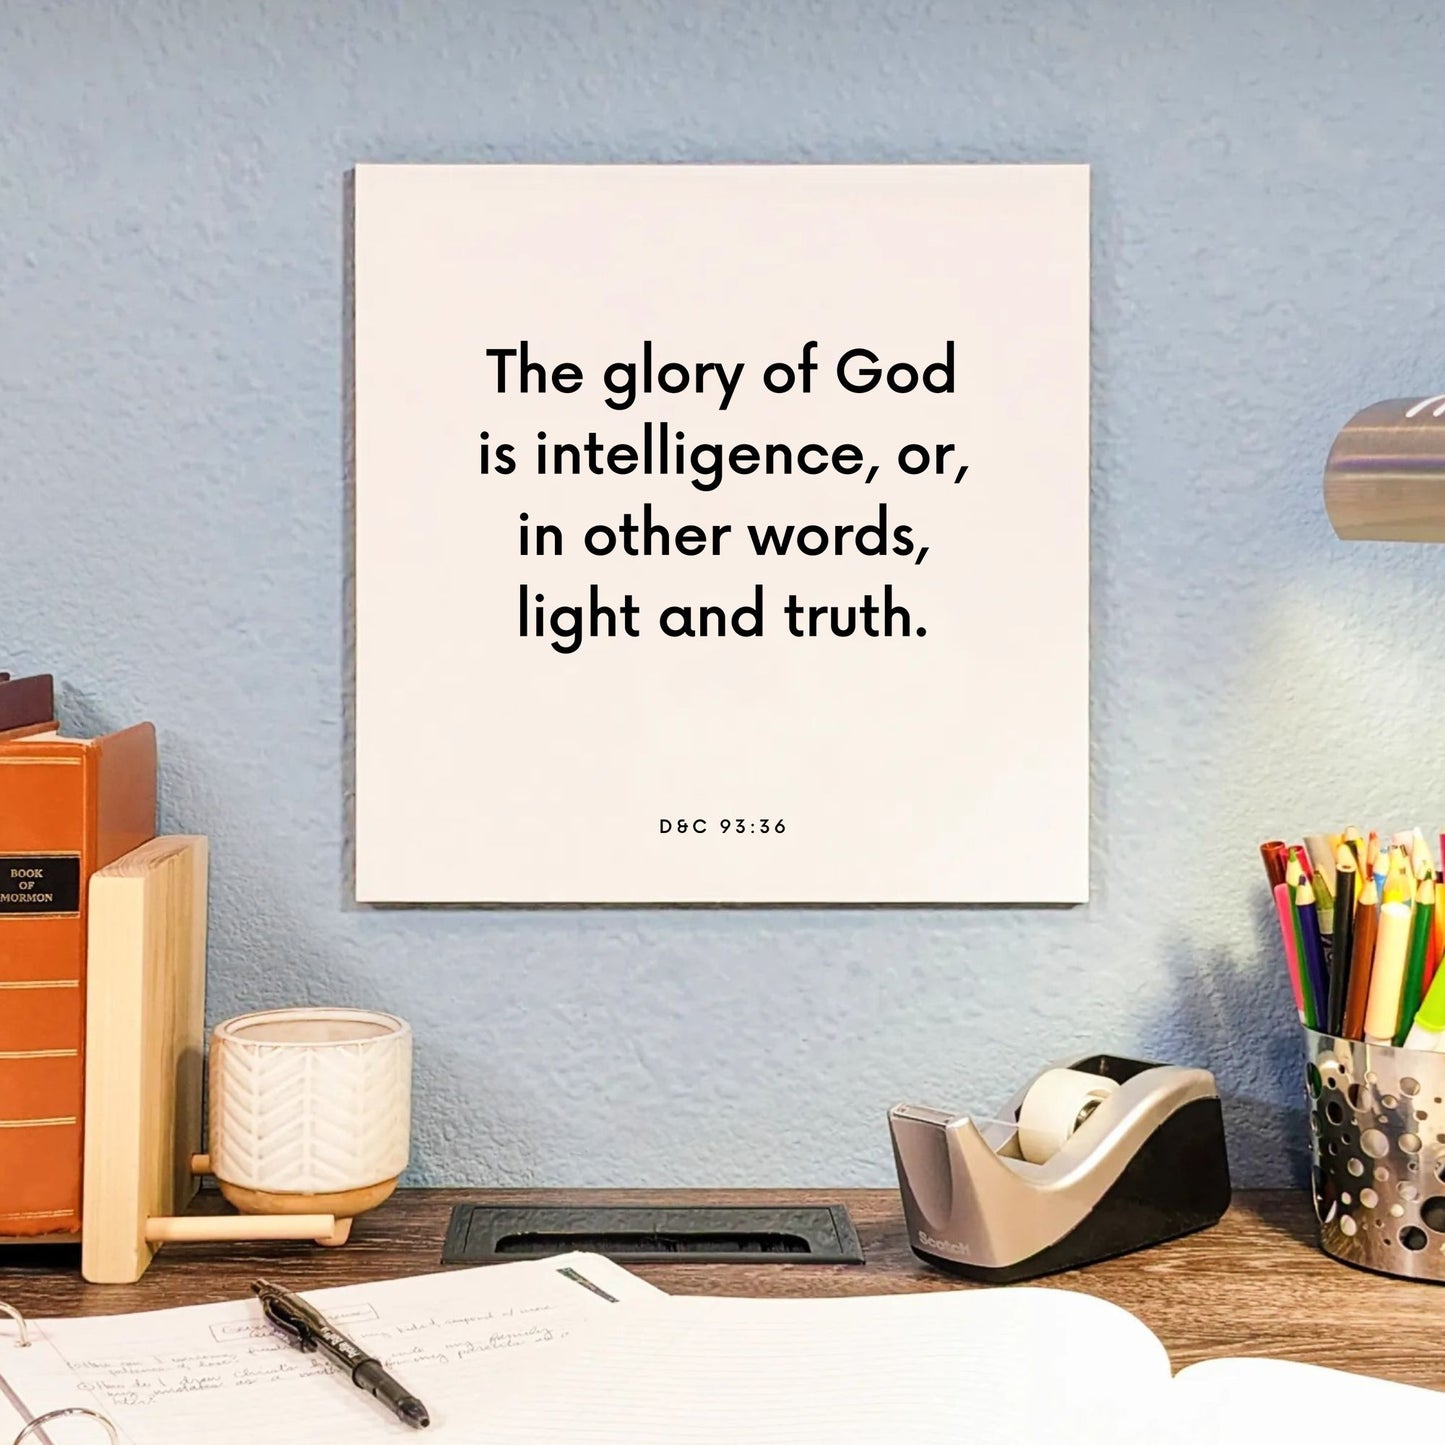 Desk mouting of the scripture tile for D&C 93:36 - "The glory of God is intelligence"